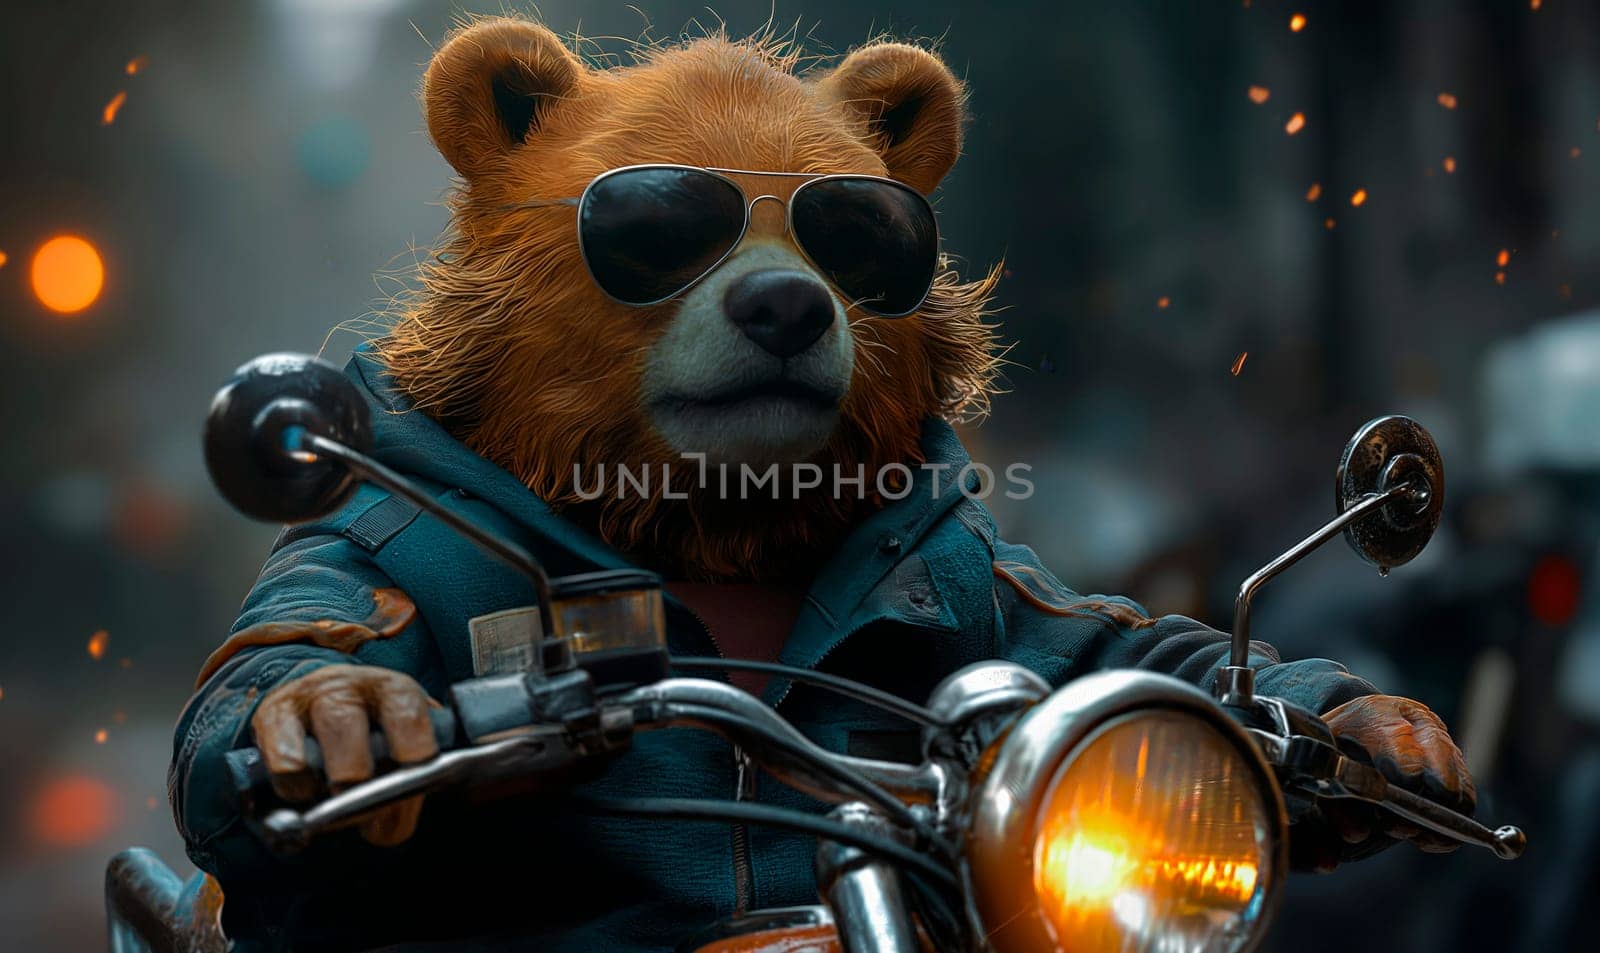 Children's illustration, a bear in sunglasses on a motorcycle. by Fischeron